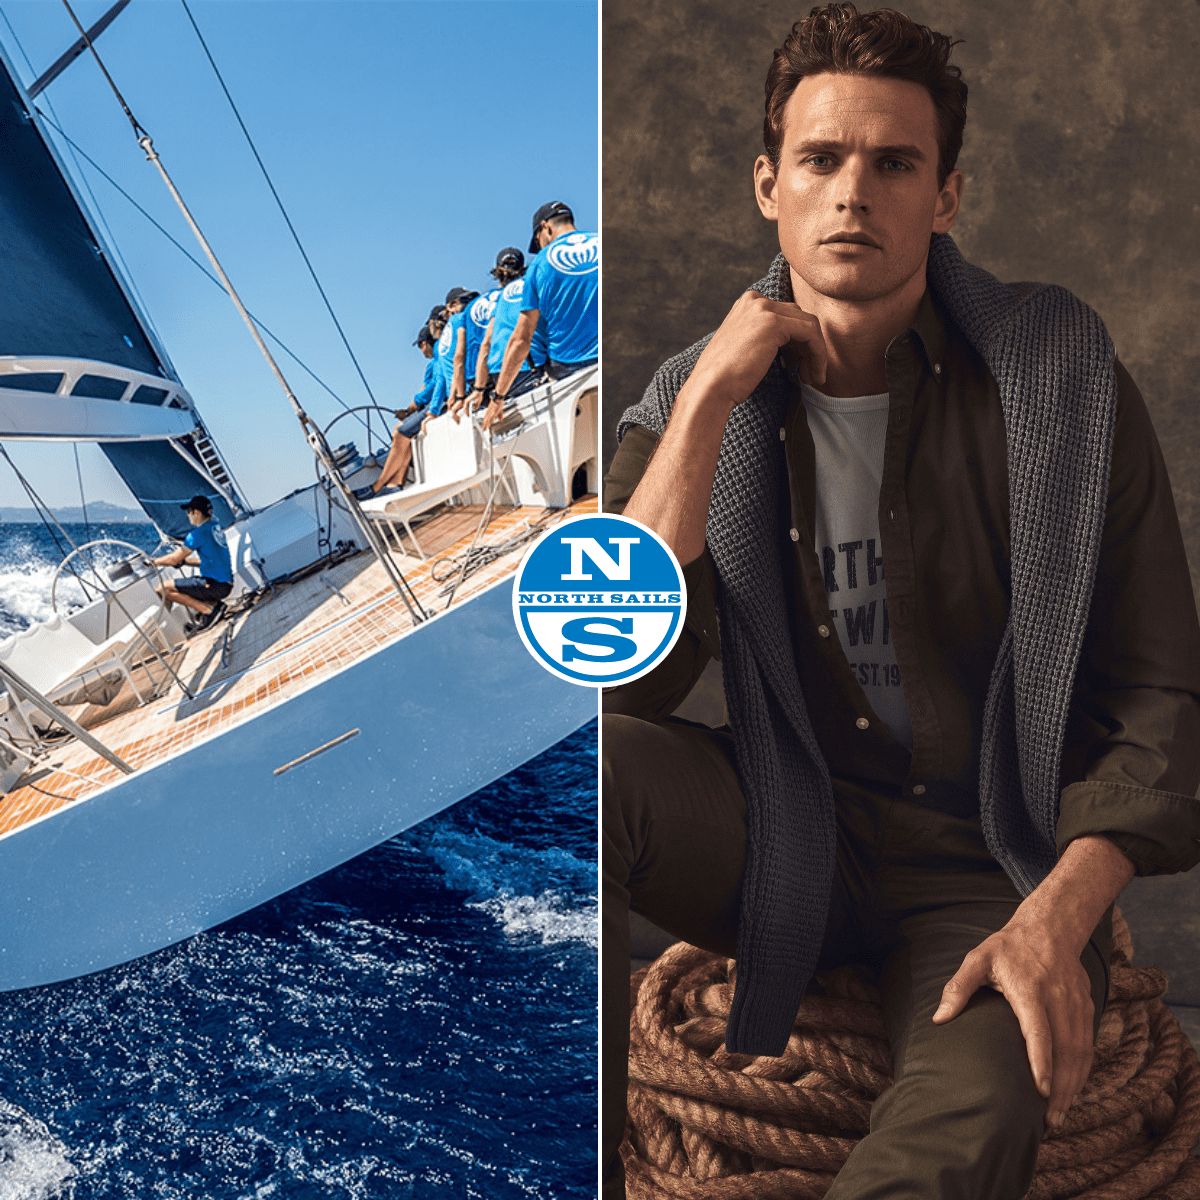 North Sails - The Worldwide Leader in Sailmaking